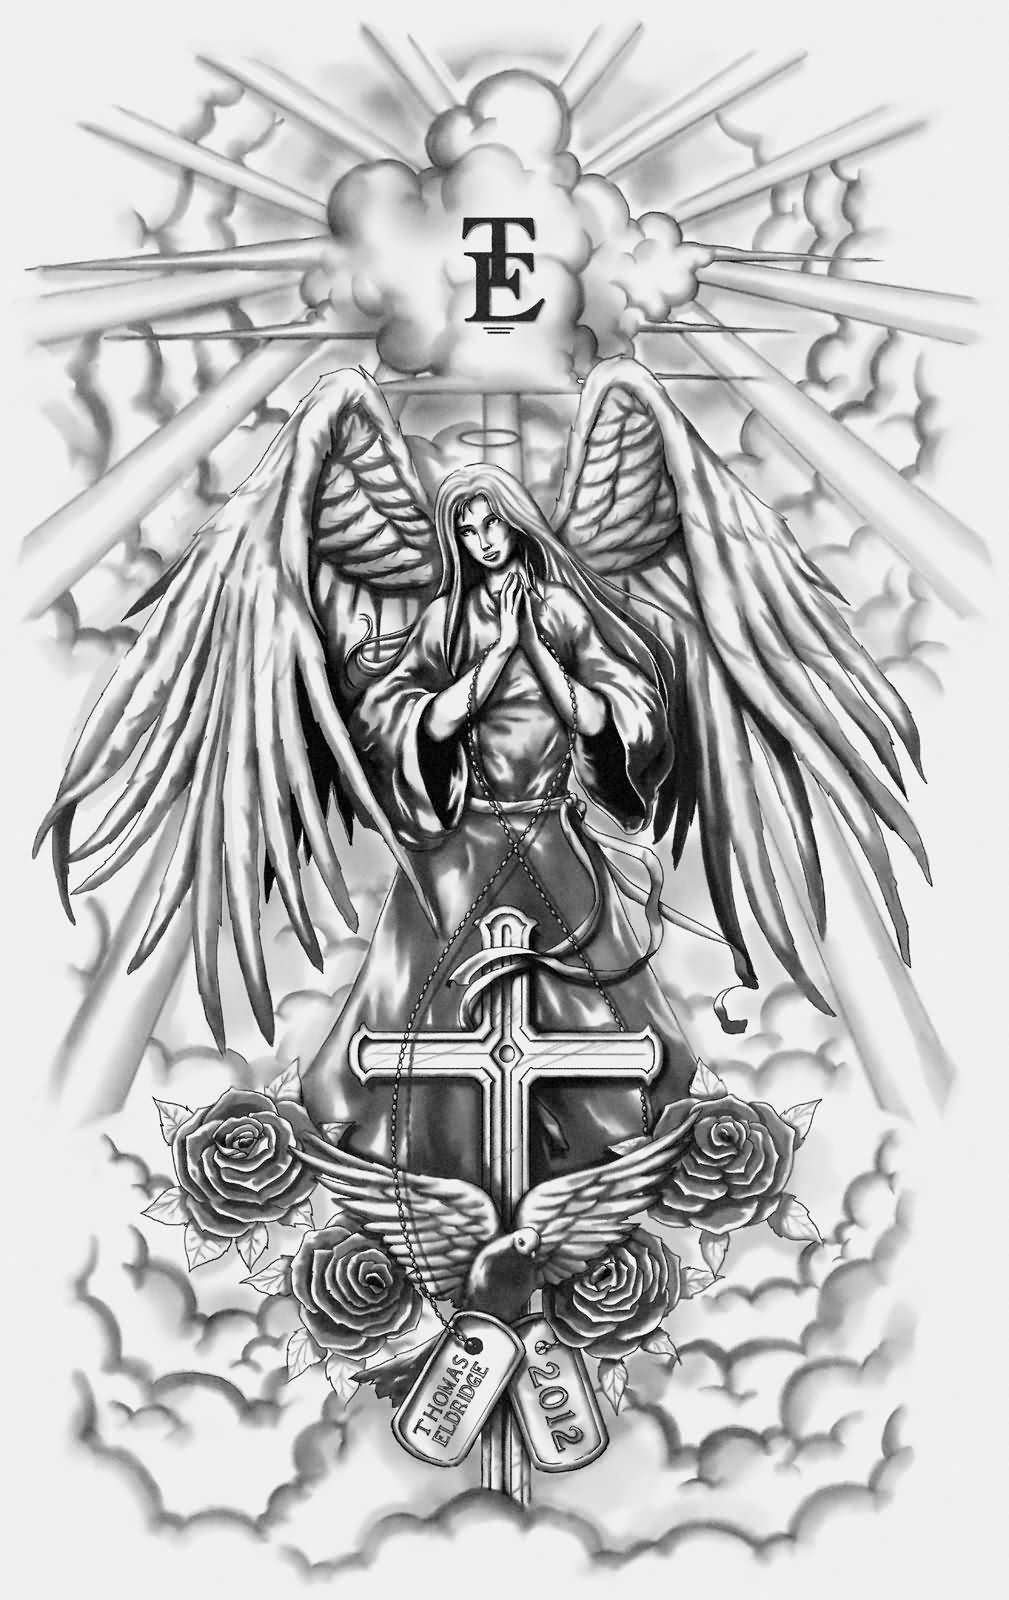 Incredible Praying Angel With Cross Clouds Tattoo Design For Back Or Chest ...